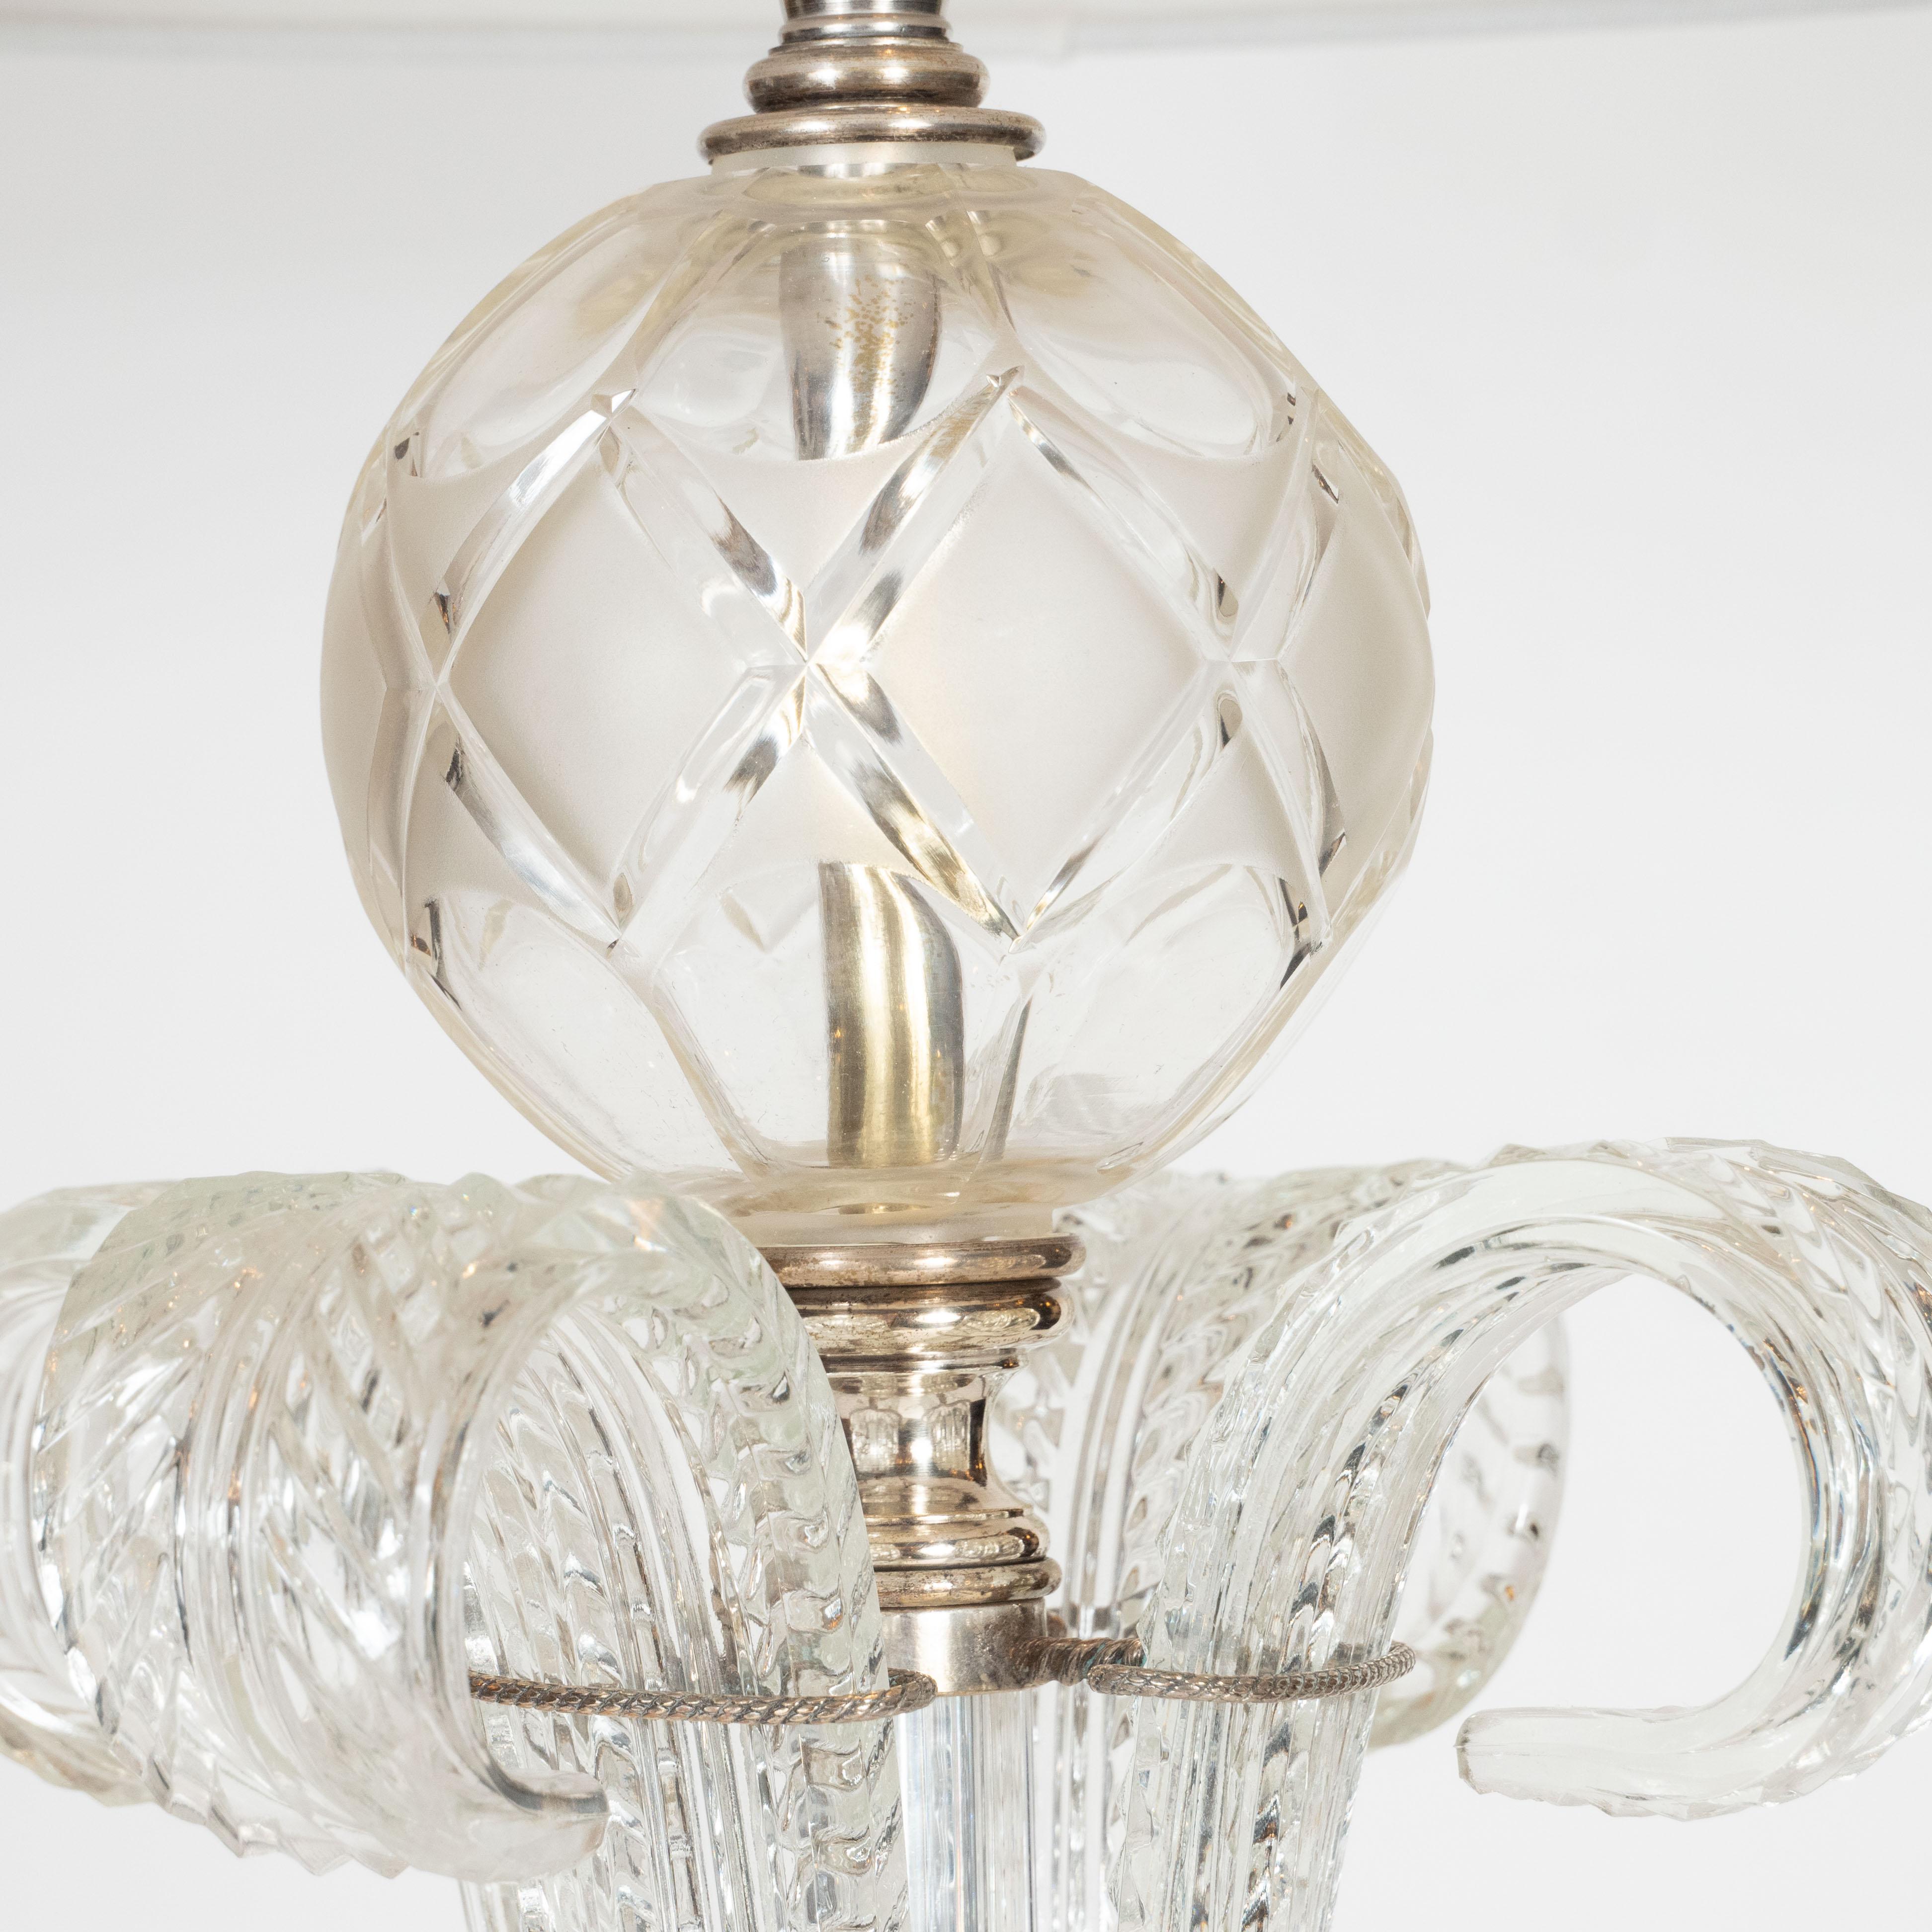 Mid-20th Century 1940s Hollywood Regency Translucent Cut Crystal Table Lamp with Acanthus Details For Sale